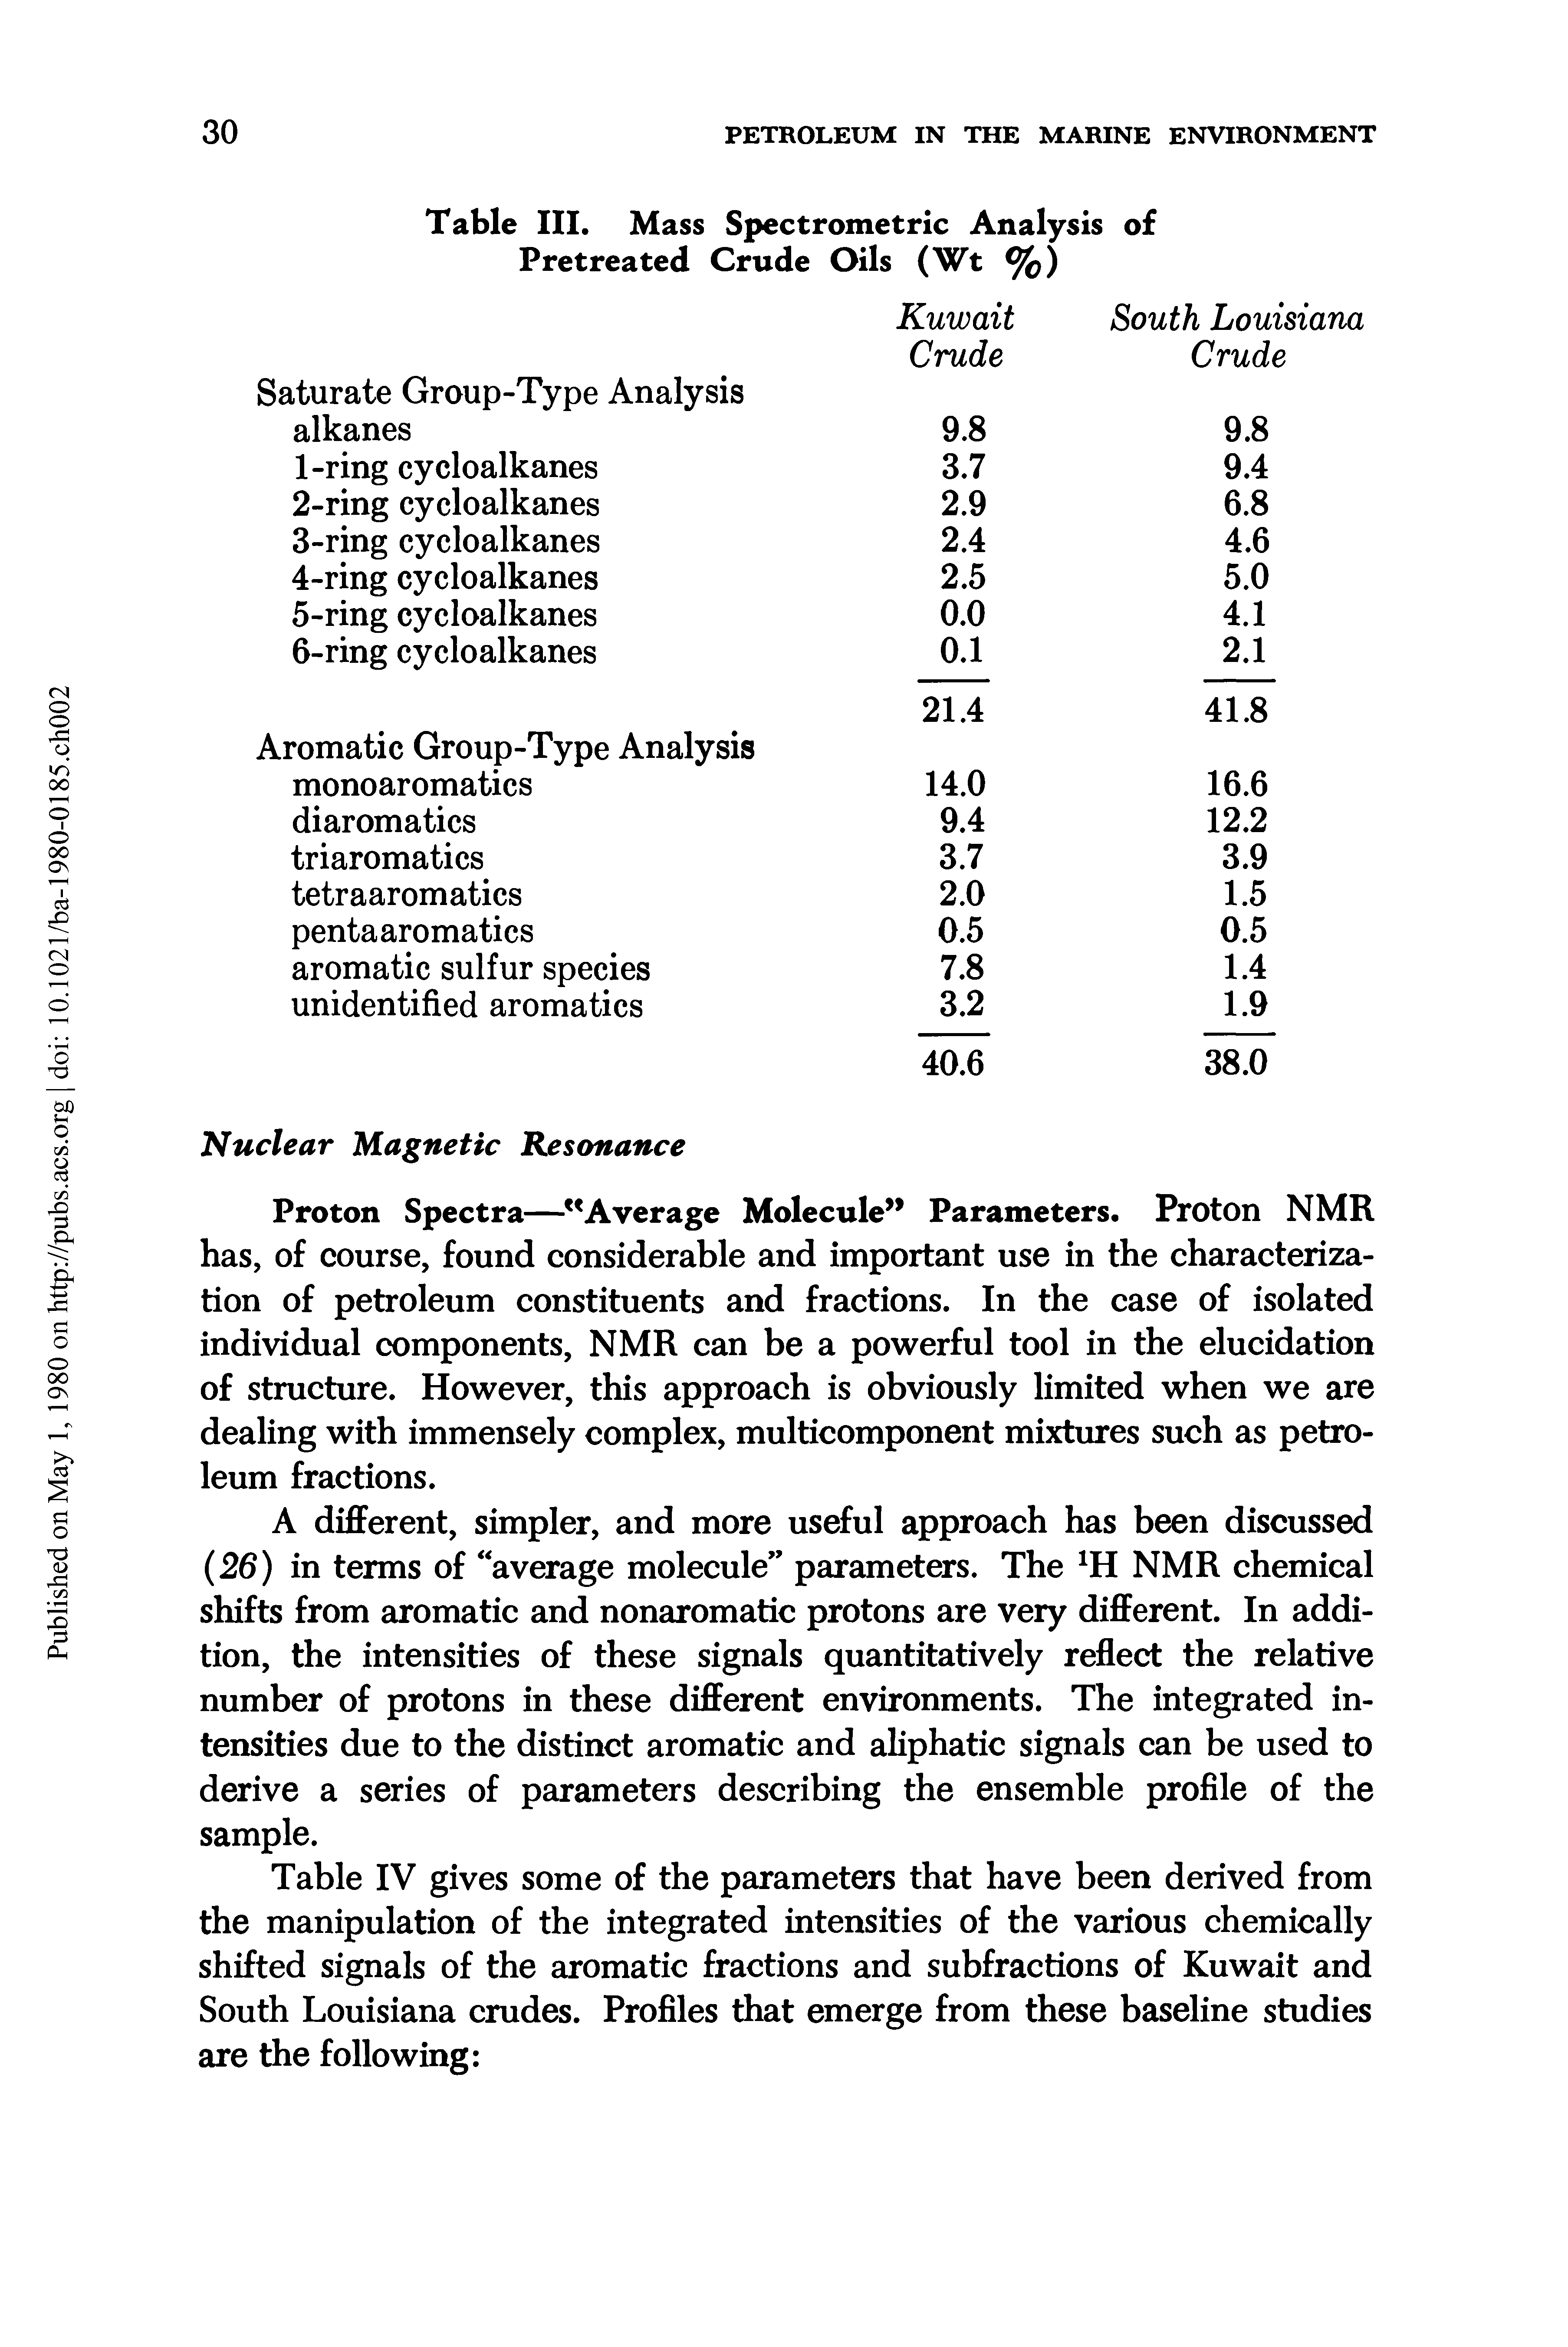 Table IV gives some of the parameters that have been derived from the manipulation of the integrated intensities of the various chemically shifted signals of the aromatic fractions and subfractions of Kuwait and South Louisiana crudes. Profiles that emerge from these baseline studies are the following ...